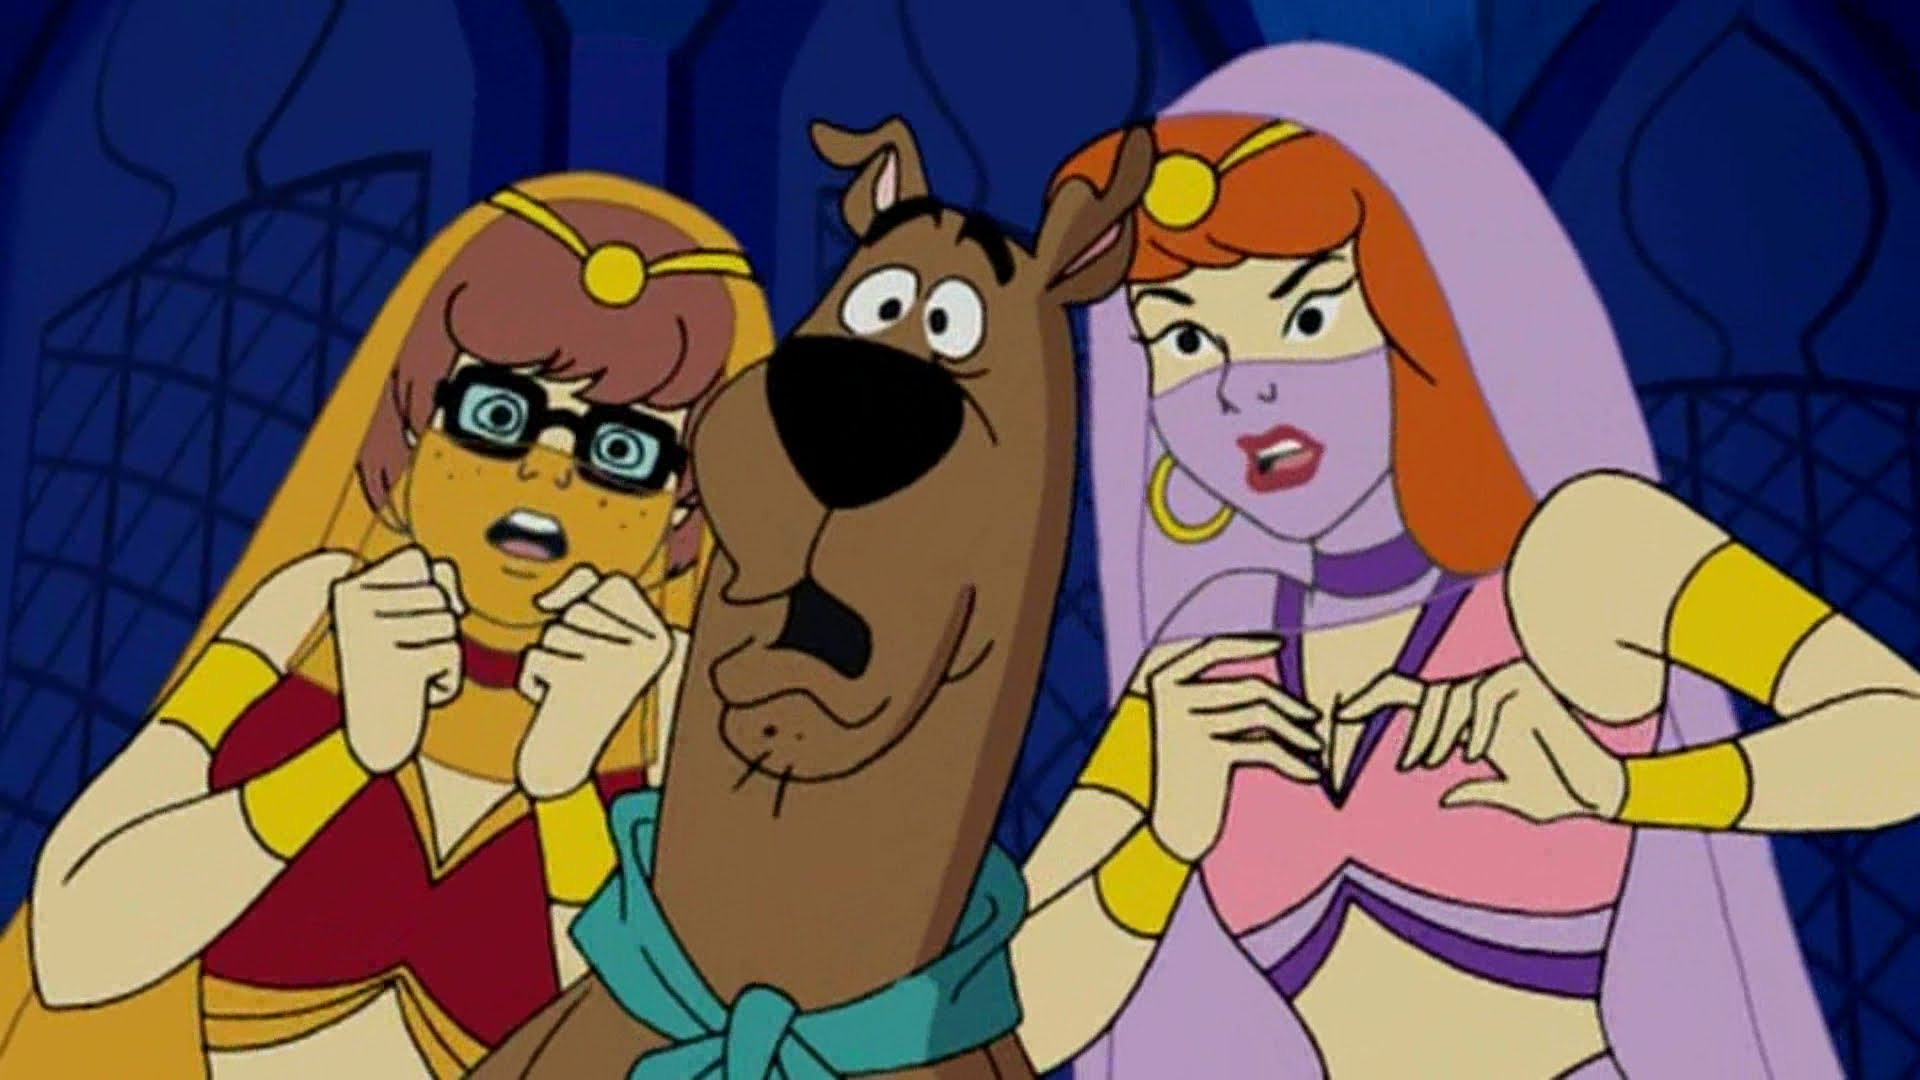 What's New Scooby Doo? The Fatima Sisters